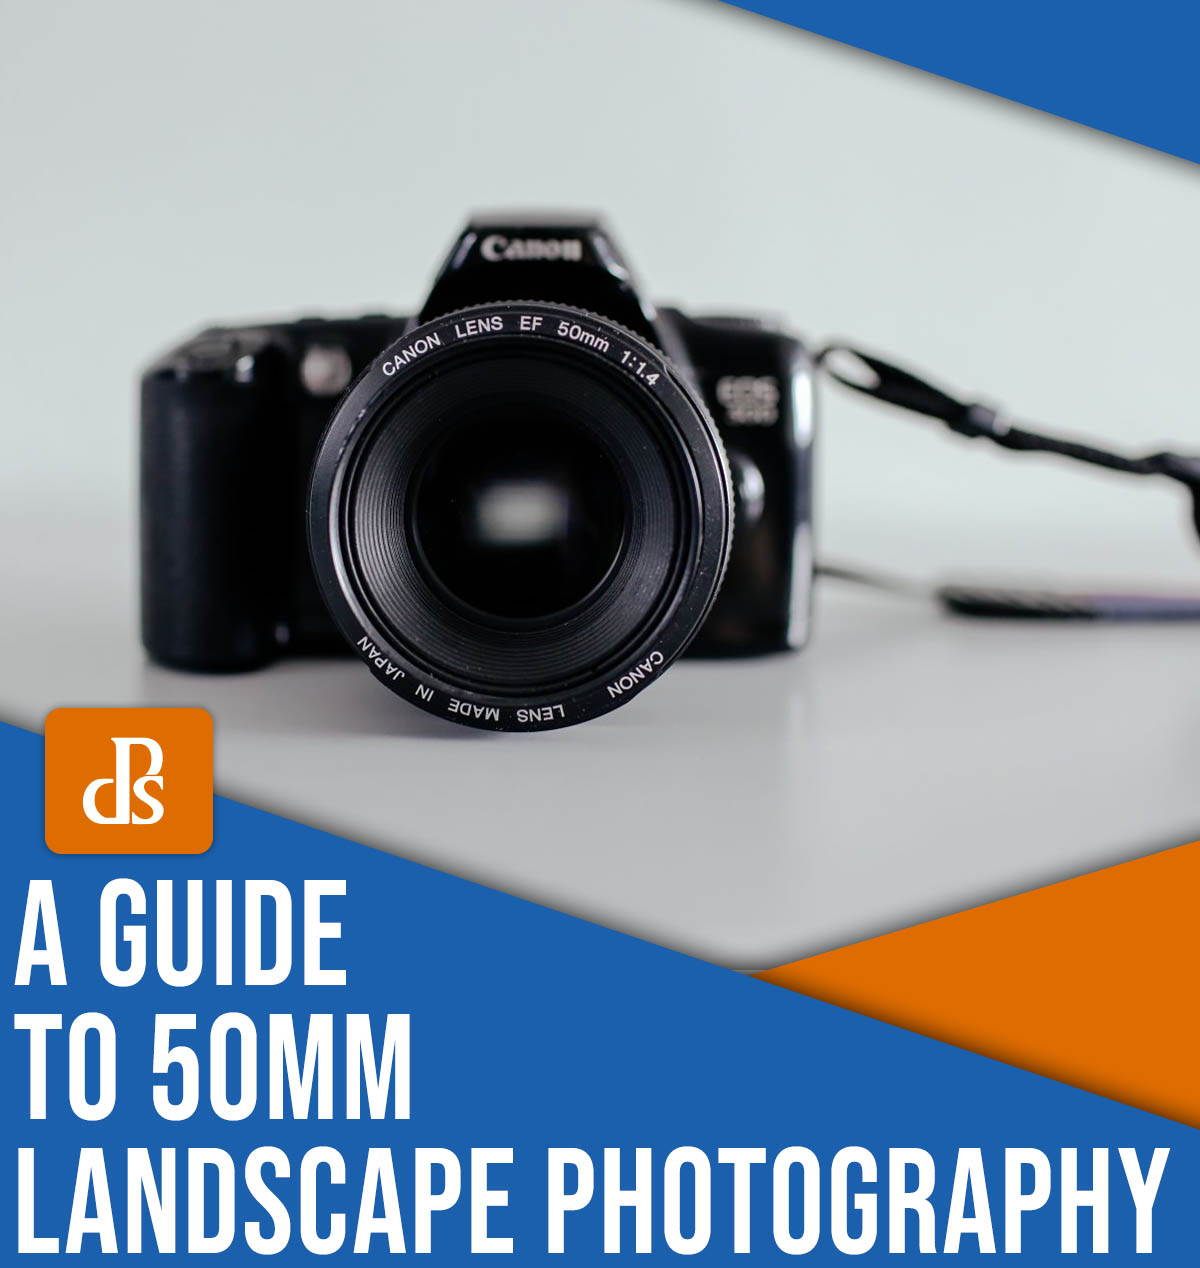 A guide to 50mm landscape photography